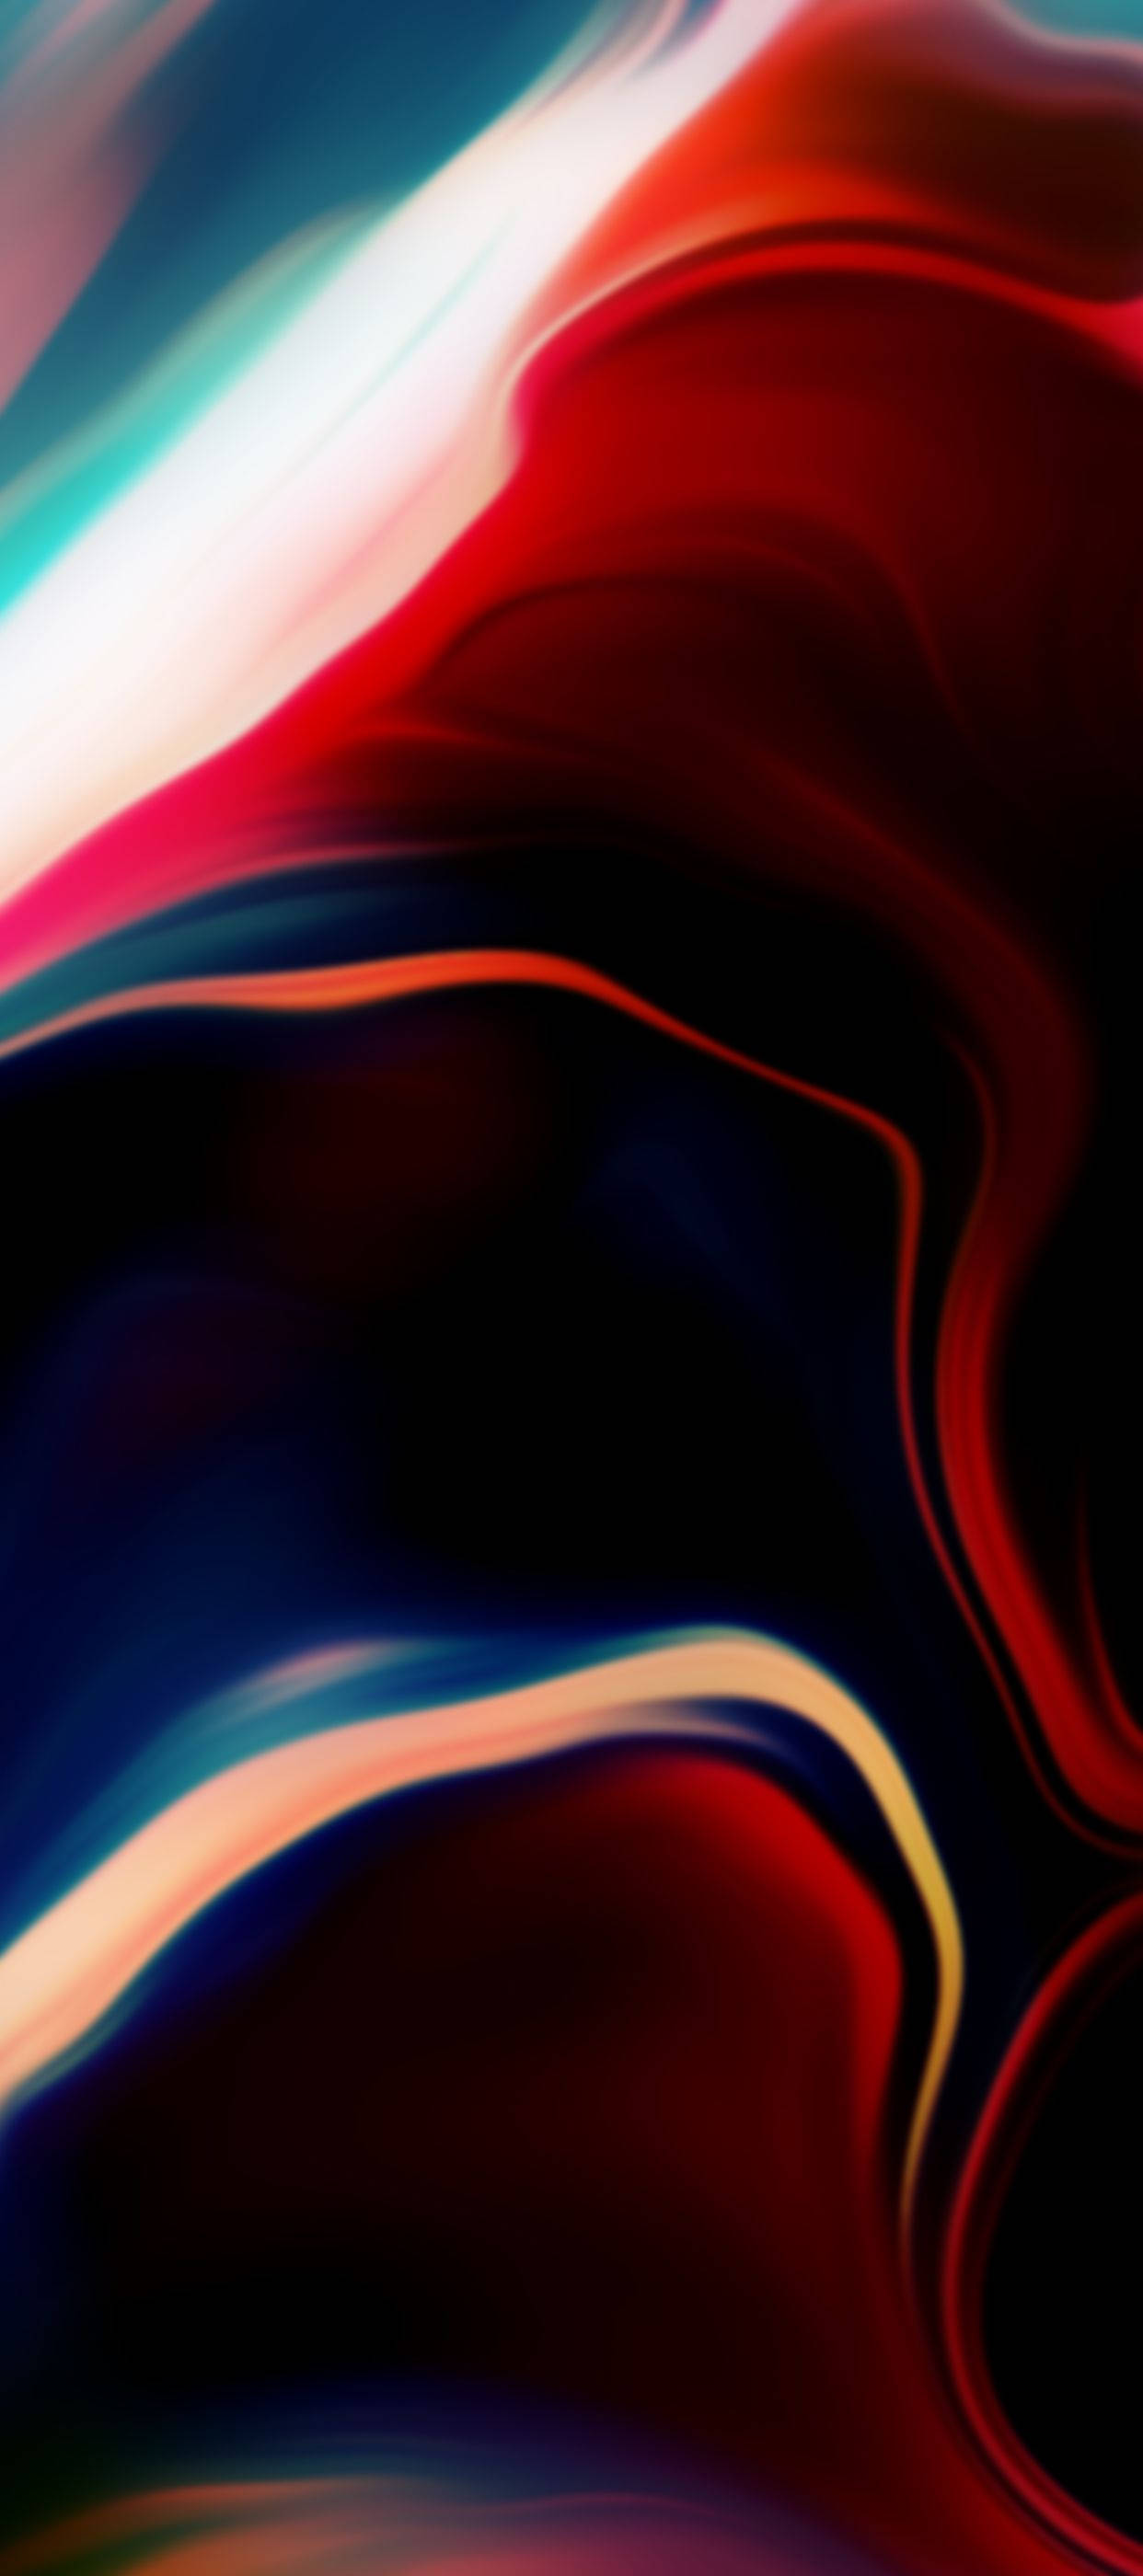 A Red, Blue, And Black Abstract Wallpaper Background